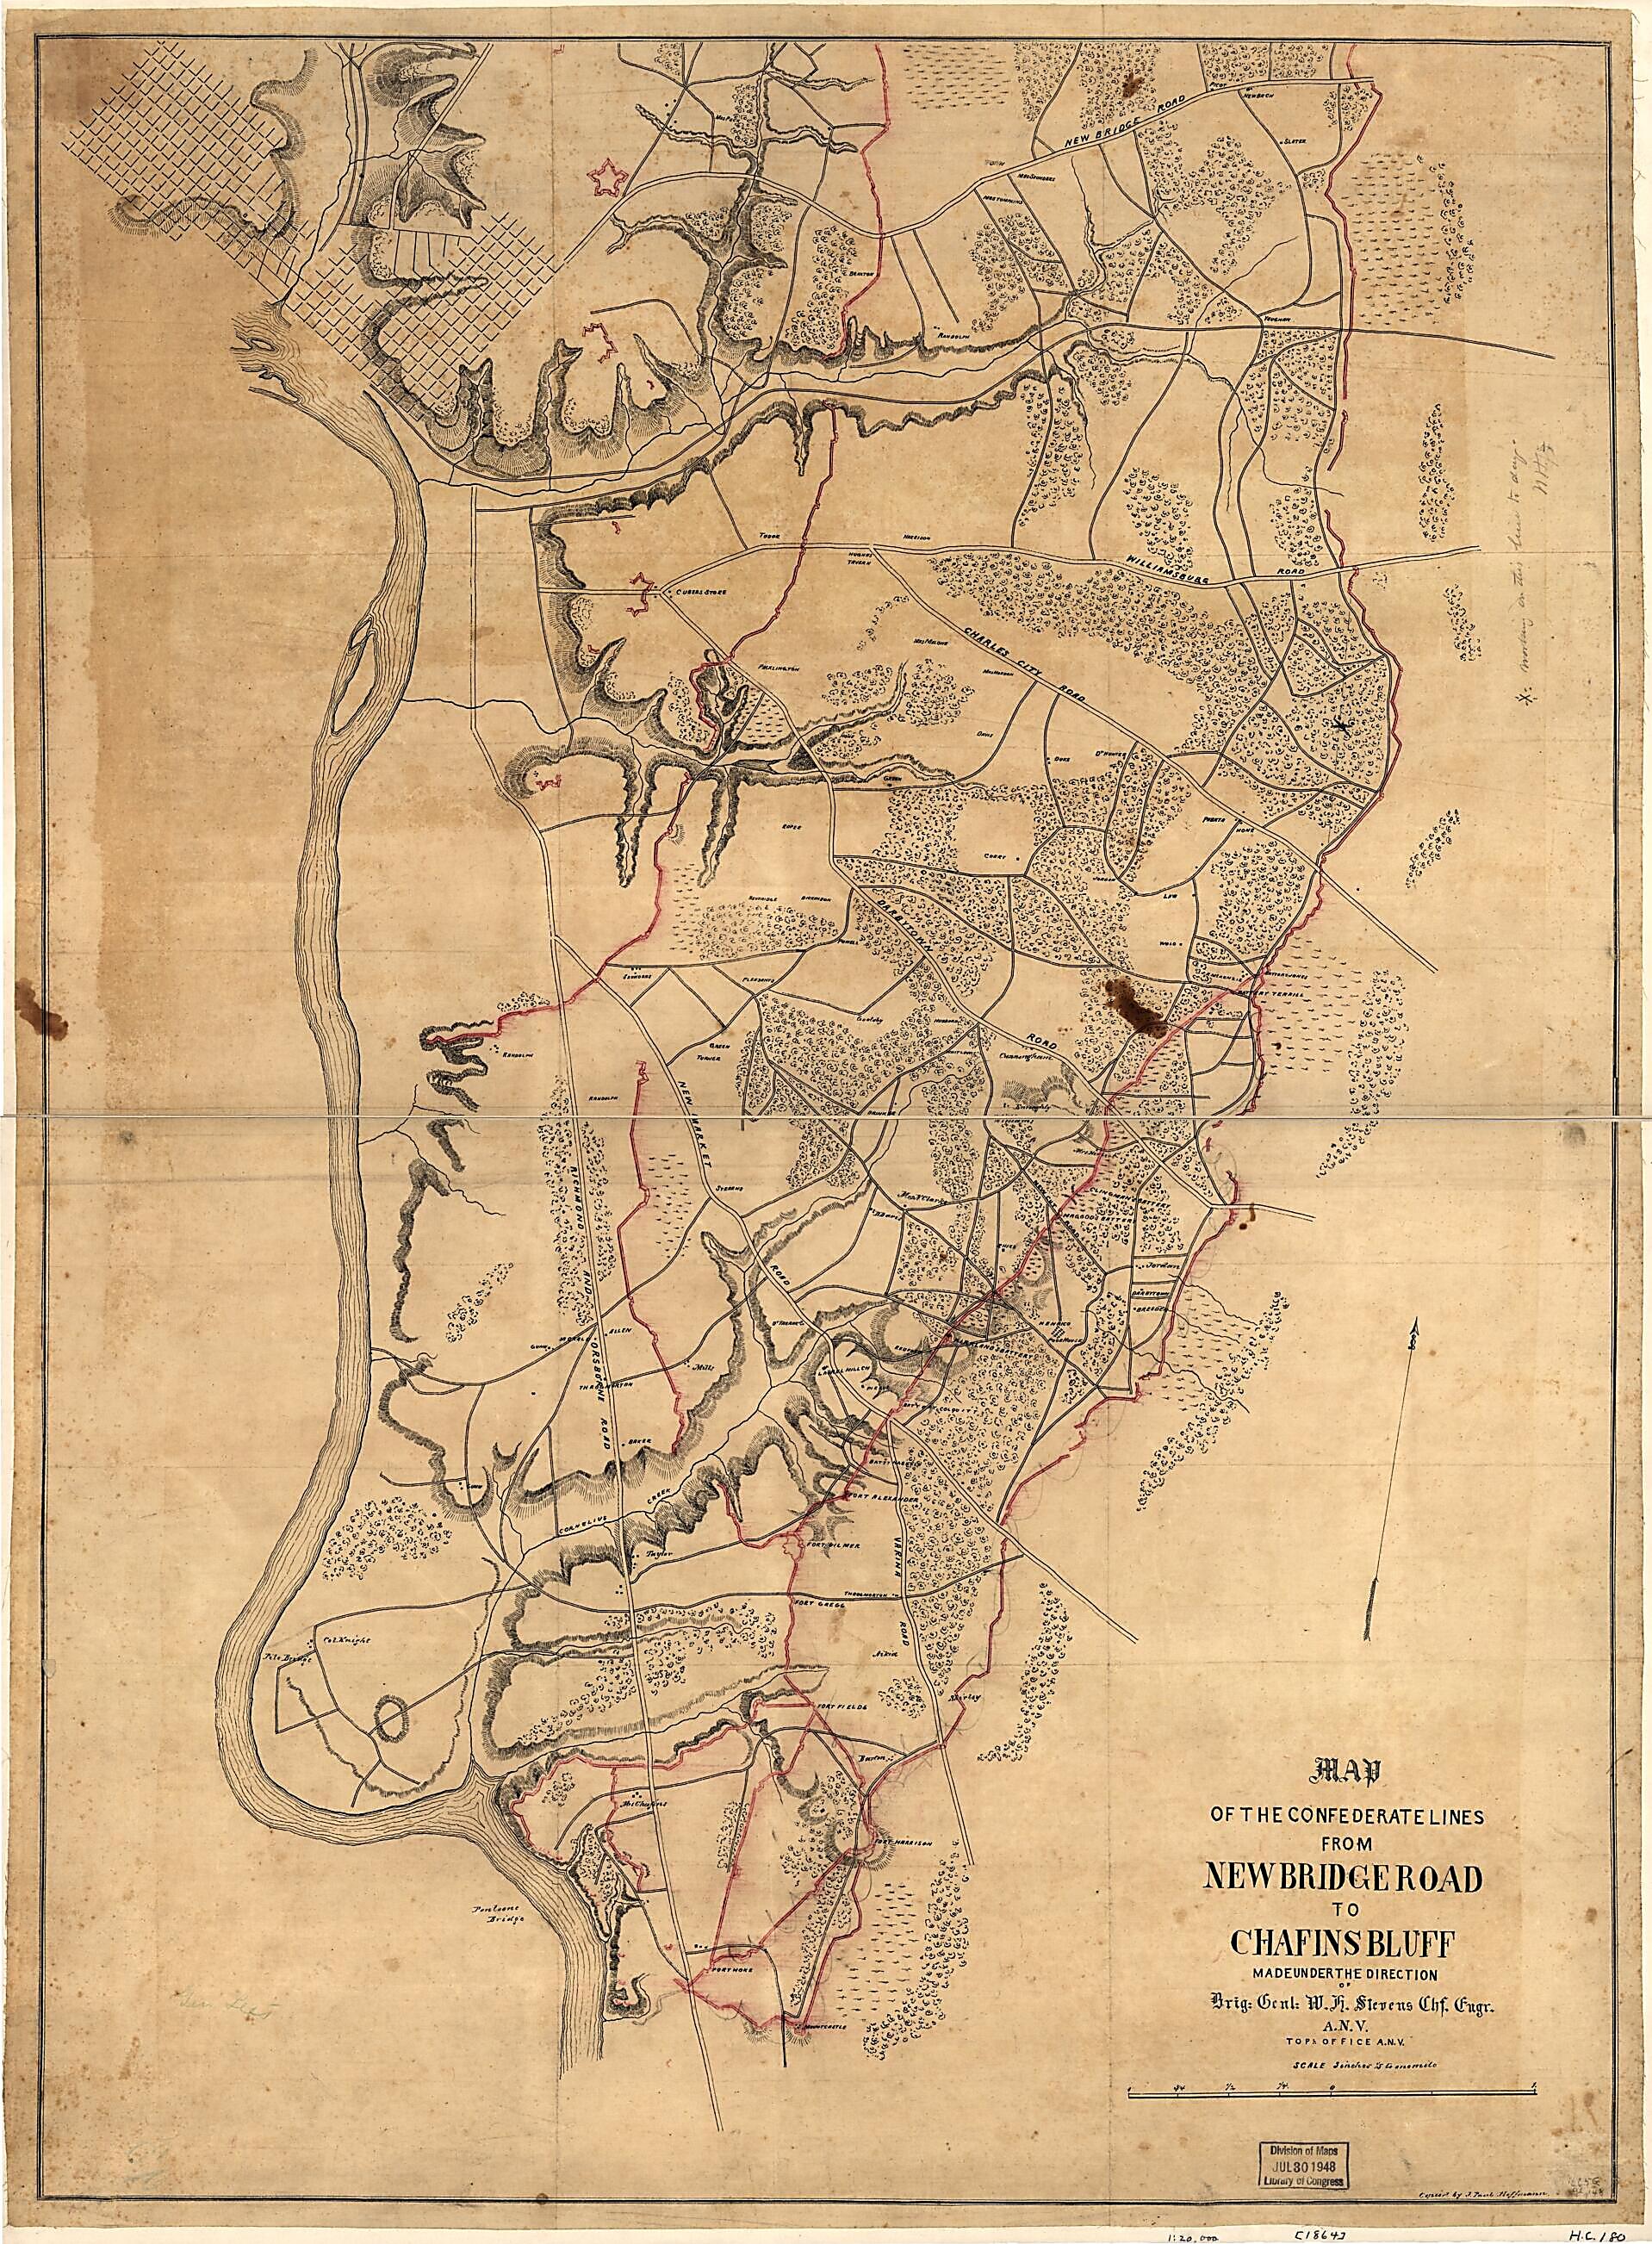 This old map of Map of the Confederate Lines from New Bridge Road to Chafins Bluff from 1864 was created by J. Paul Hoffmann, W. H. (Walter H.) Stevens in 1864